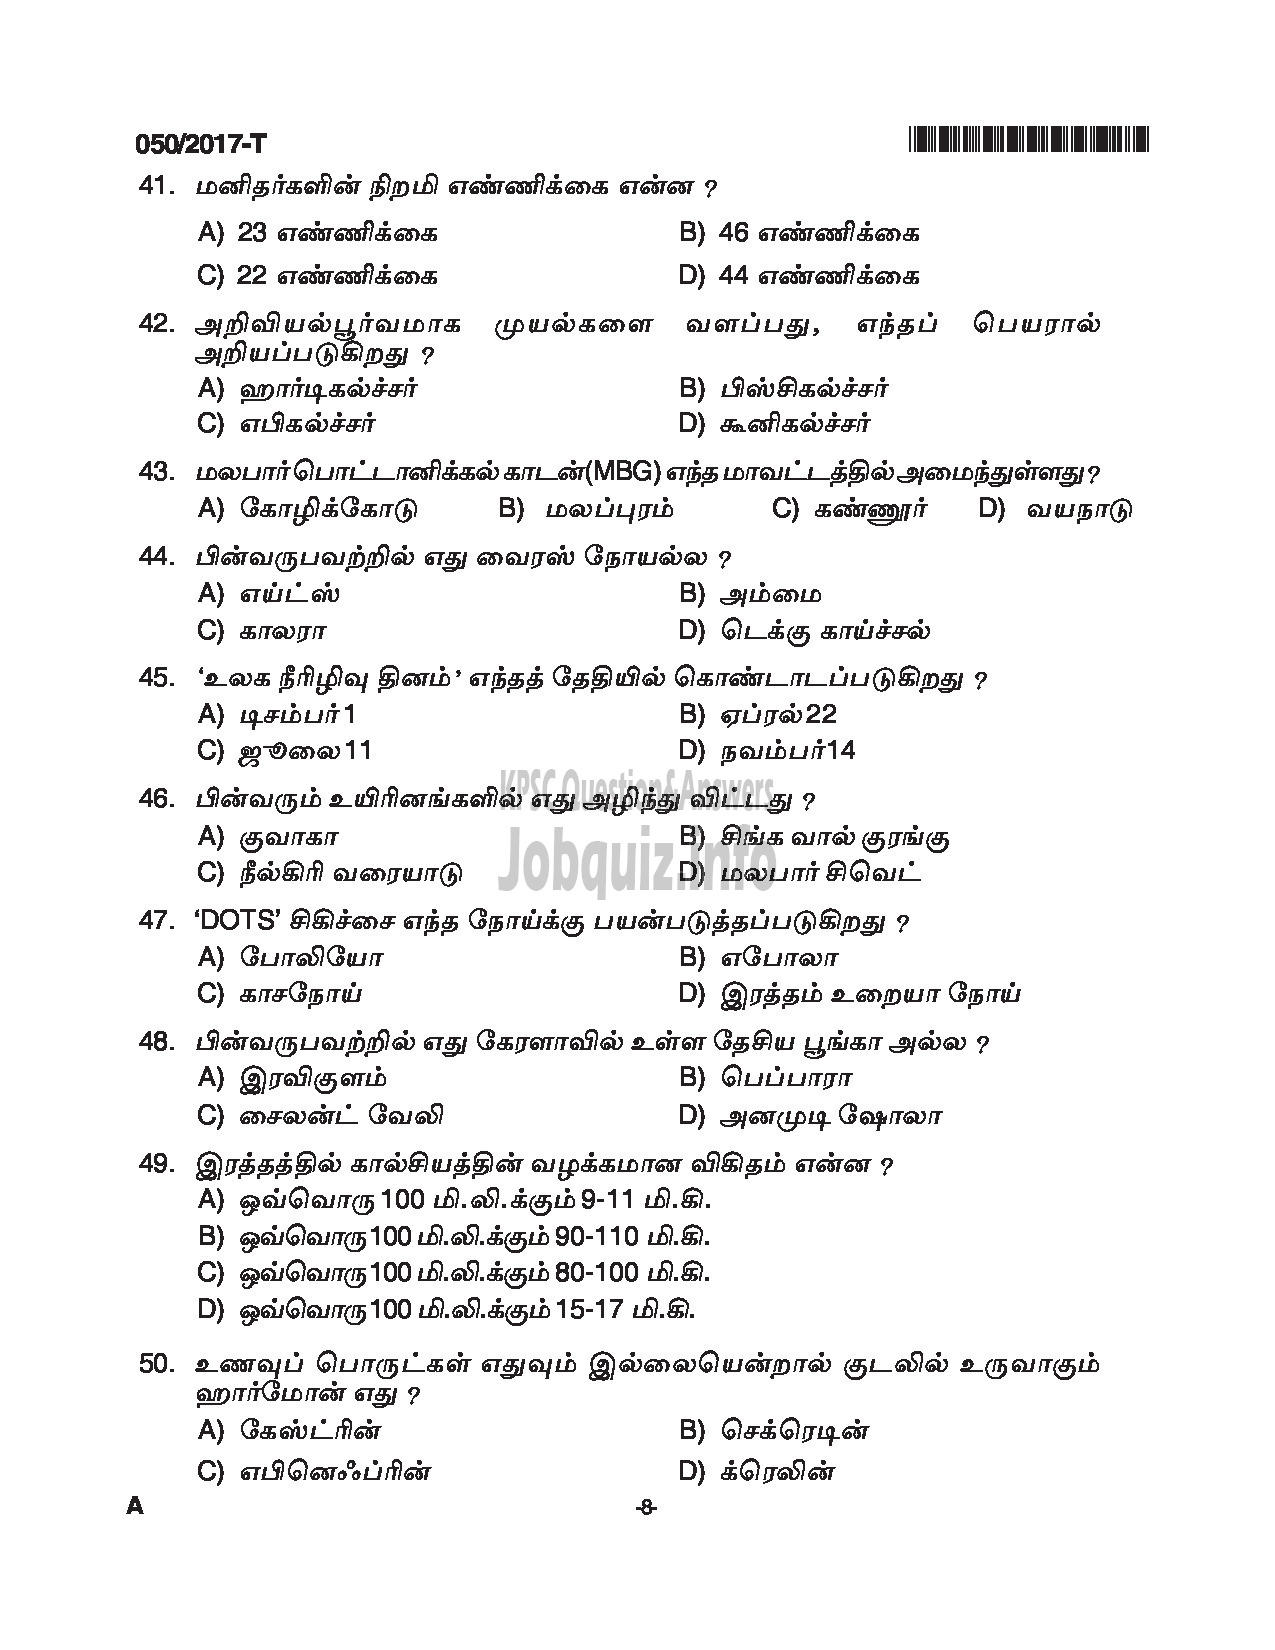 Kerala PSC Question Paper - LDC SR FOR SC/ST, SR FROM DIFFERENTLY ABLED CANDIDATES CAT.NO 122/16, 413/16 QUESTION PAPER(TAMIL)-8